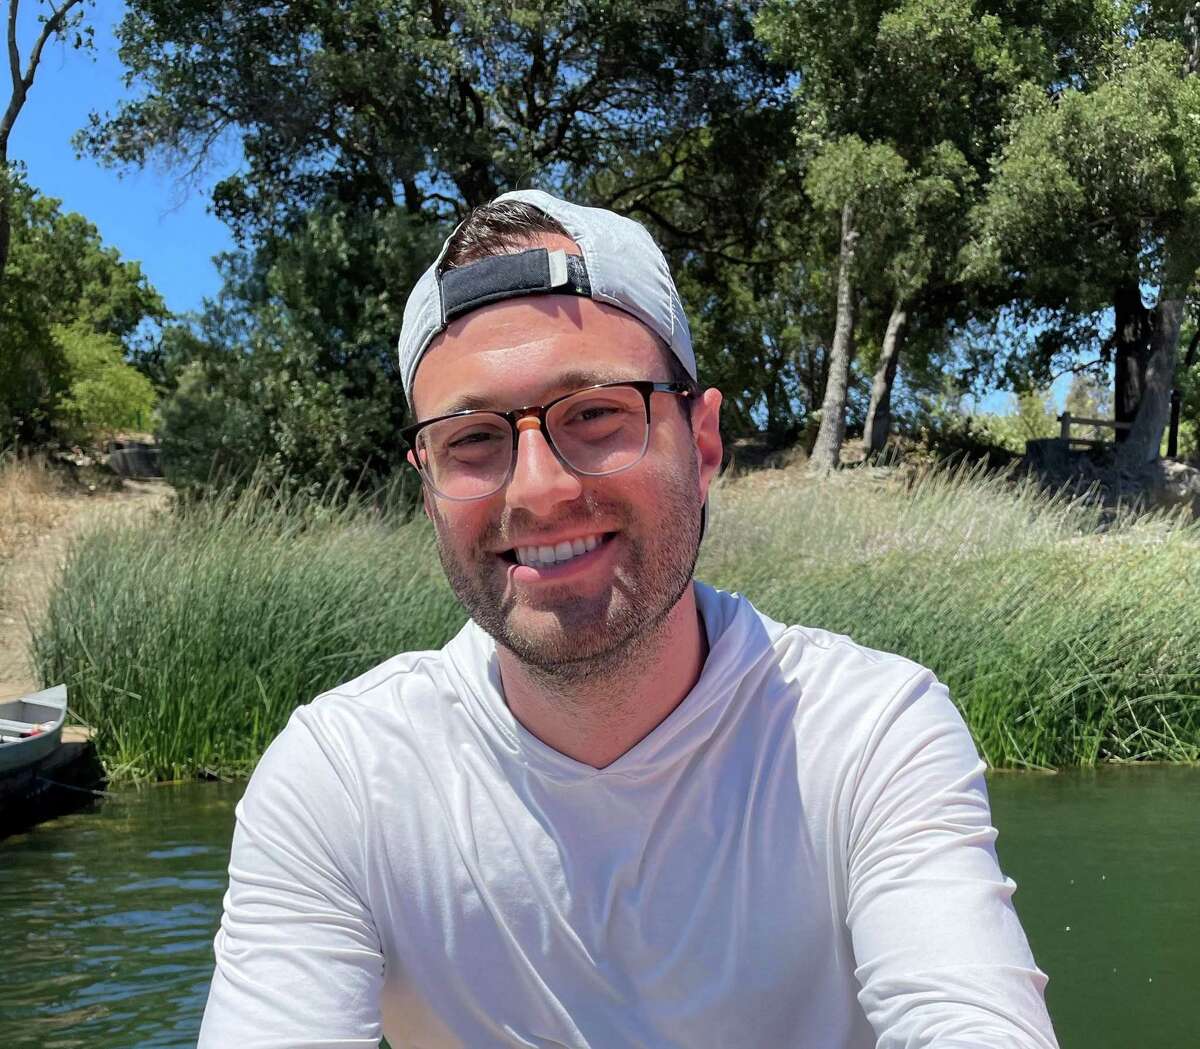 Months after Tyler Gustafson, 30, of Berkeley recovered from COVID in 2020, he was hit with what felt like a “heart attack every moment of the day” for seven months.